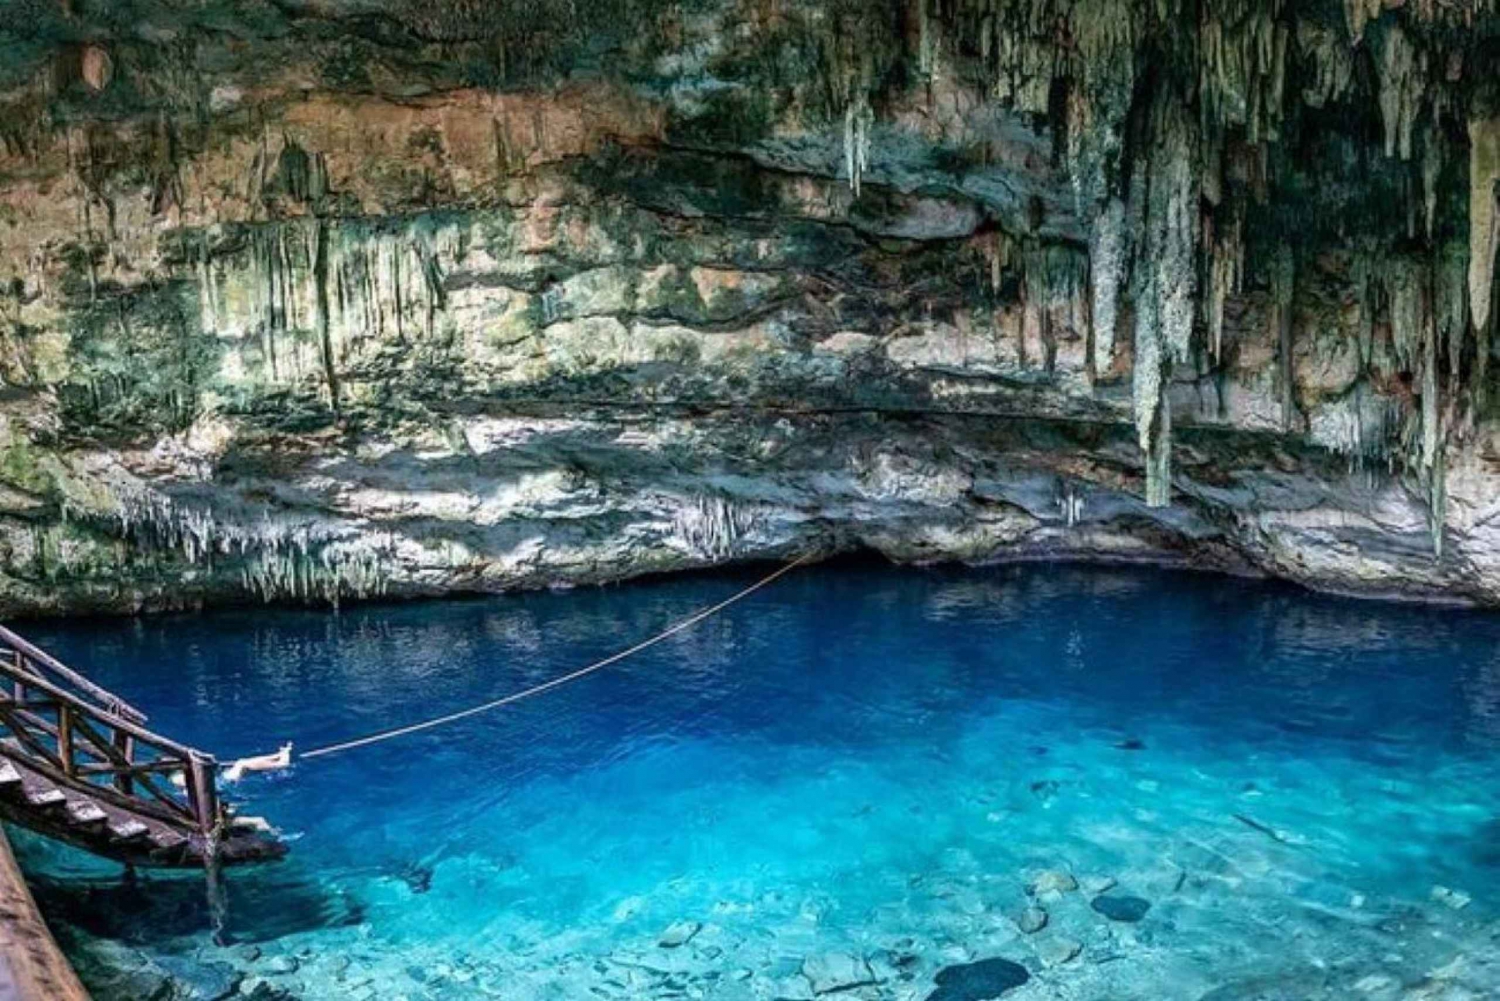 Merida: Cenotes Full-Day Tour with Lunch